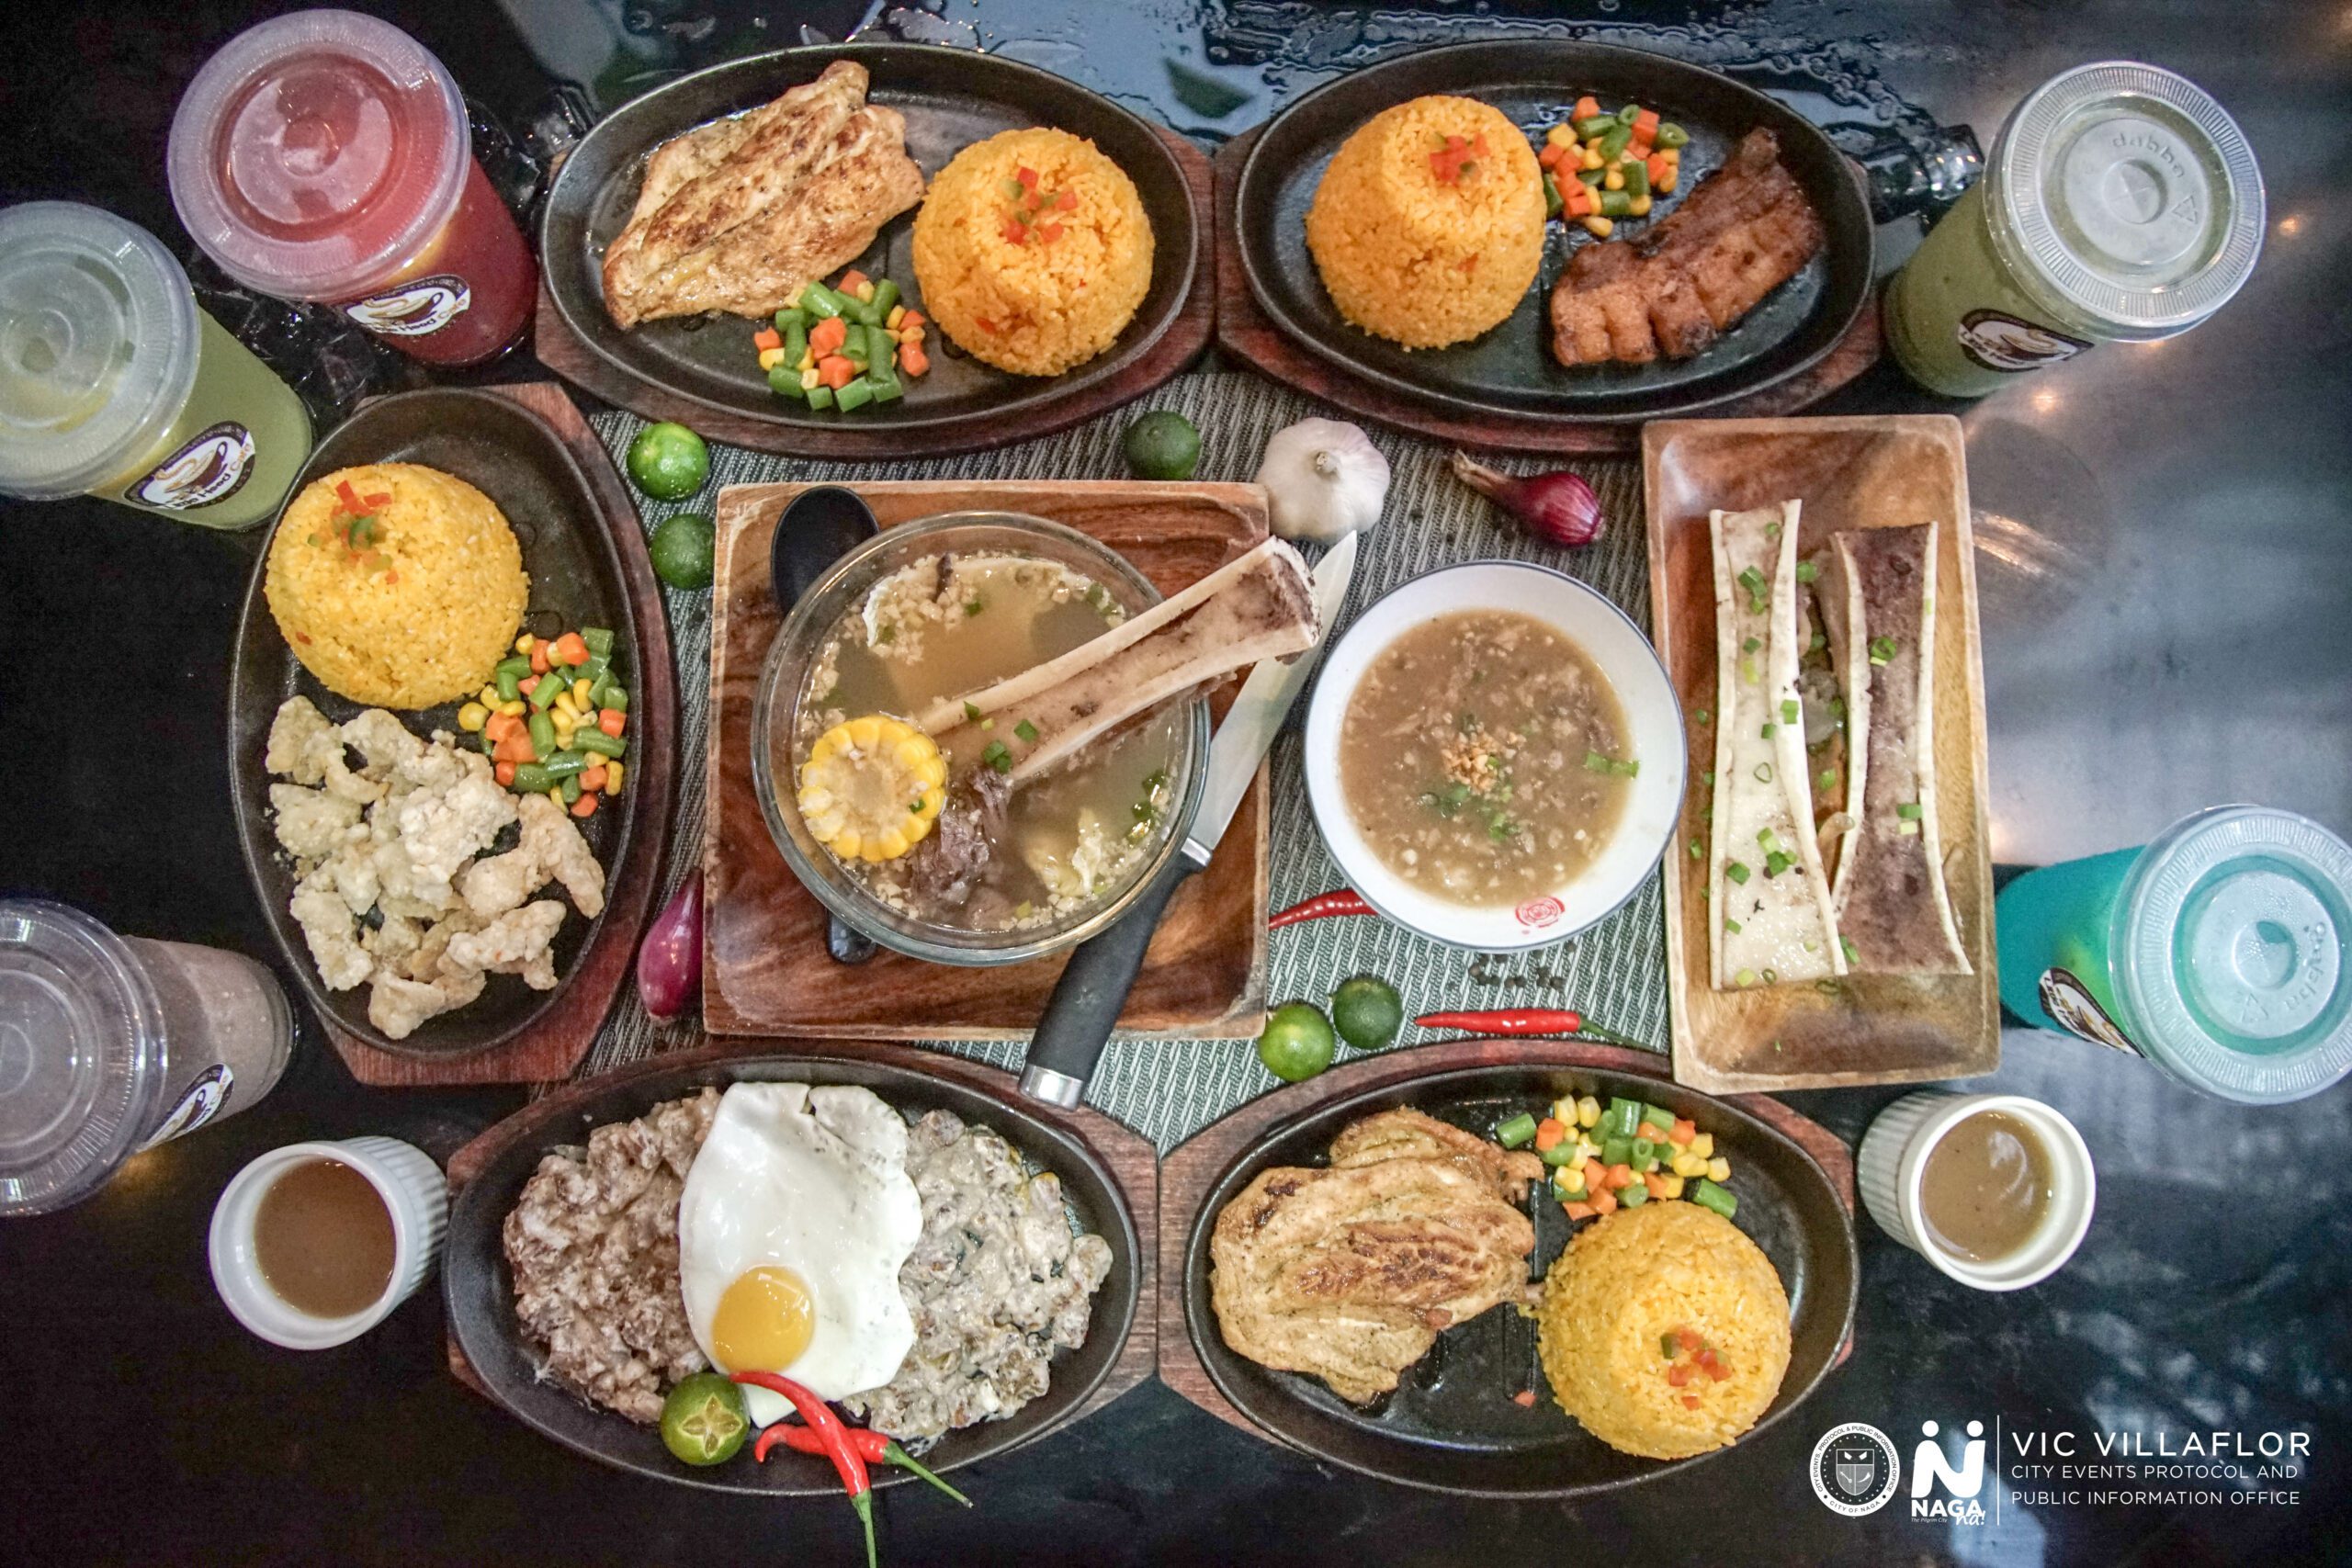 An image featuring JCJ Food Hub's assortment of food spread out onto a table.